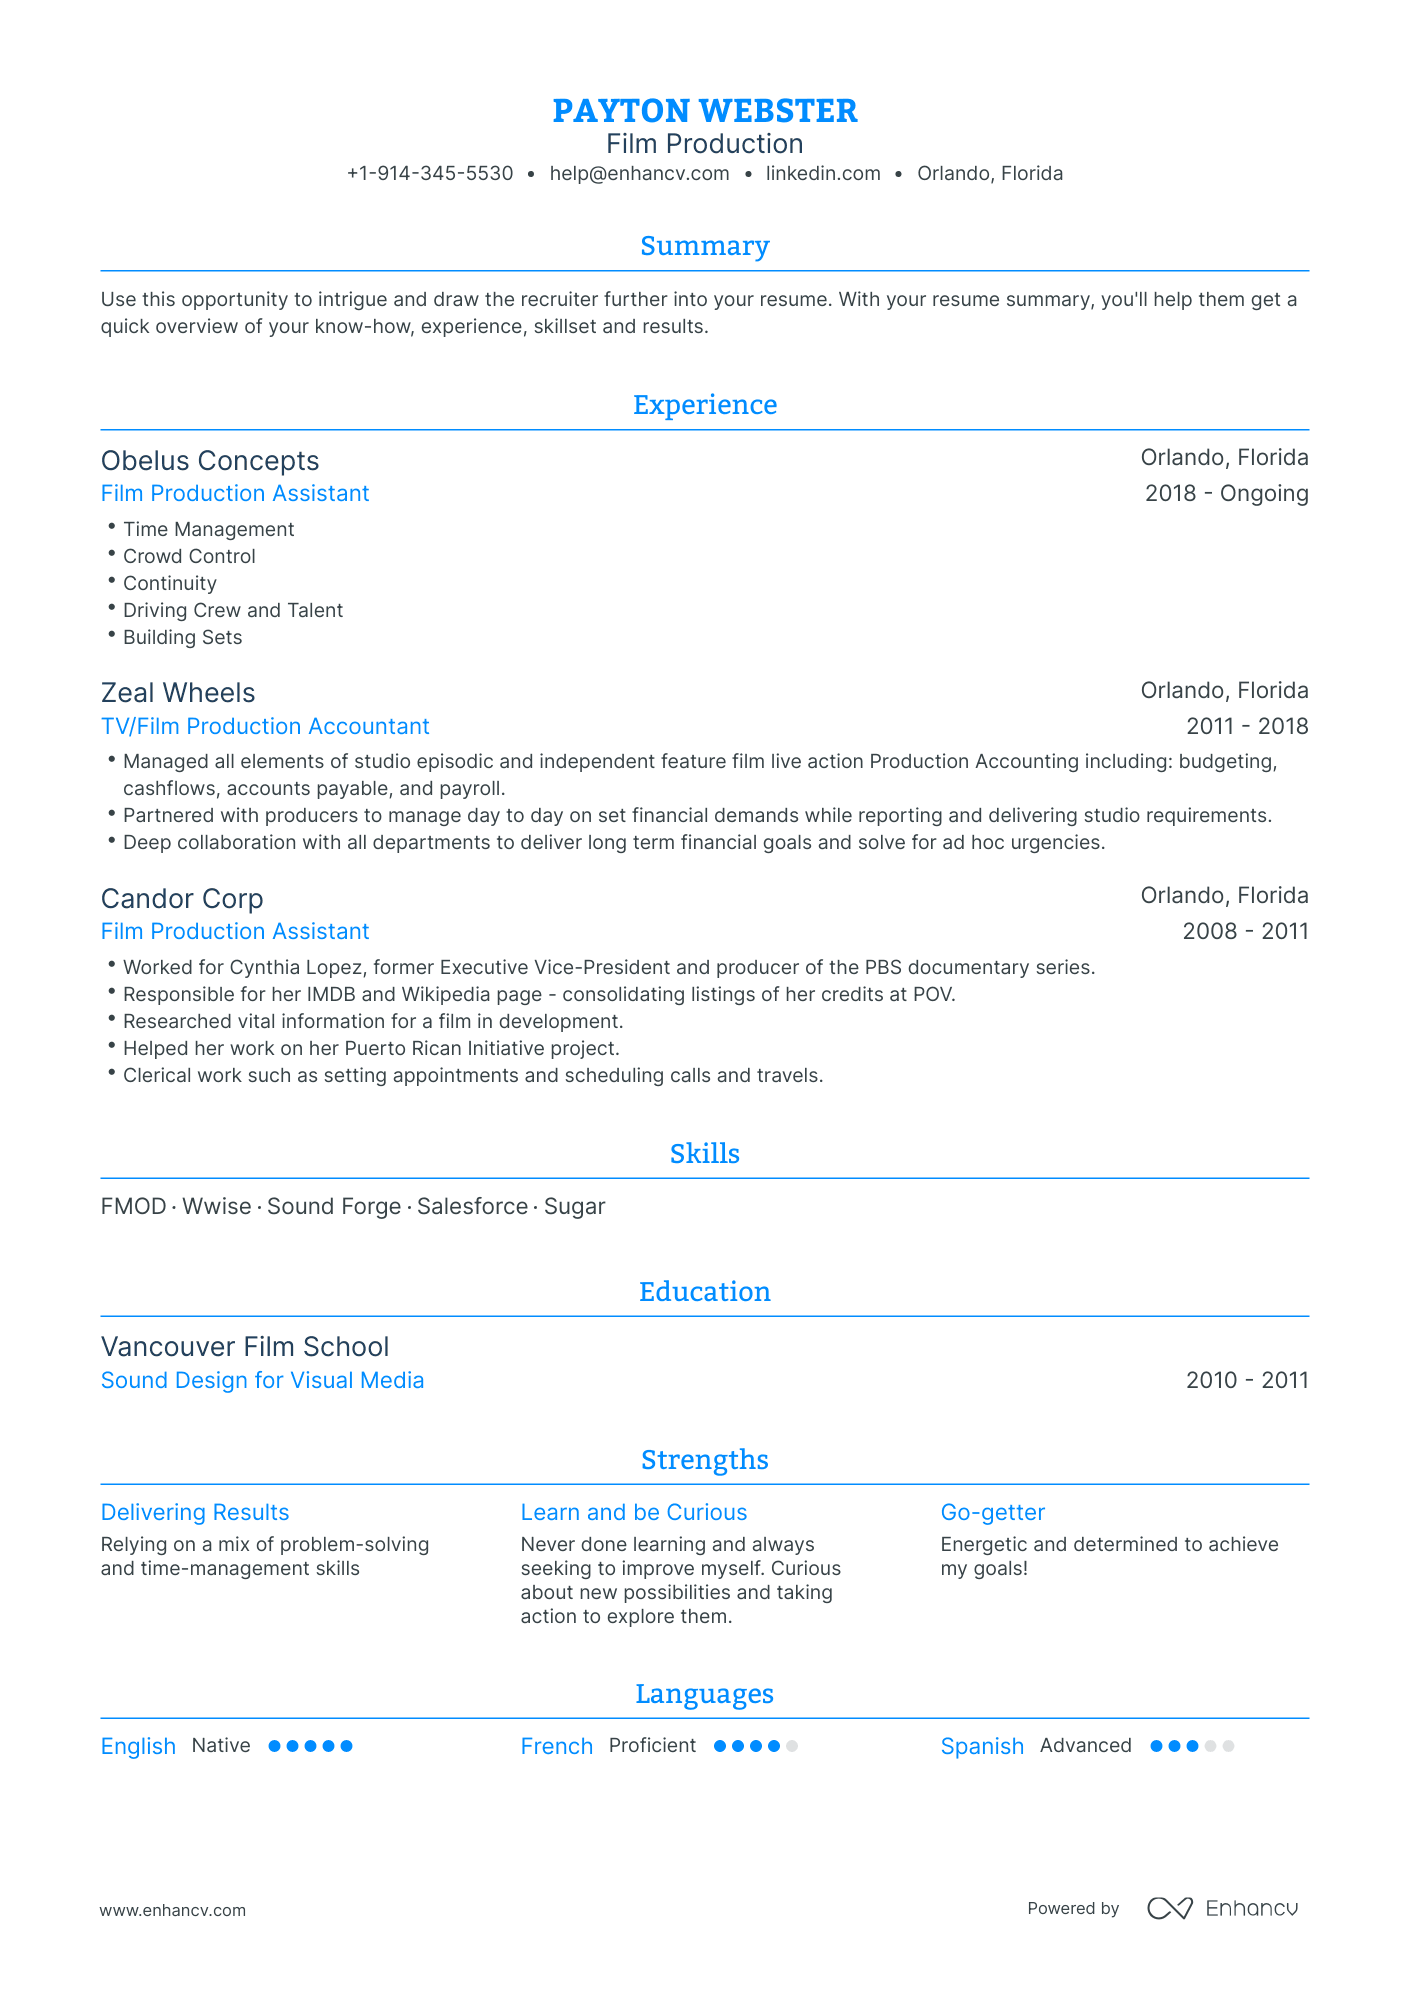 Traditional Film Production Resume Template